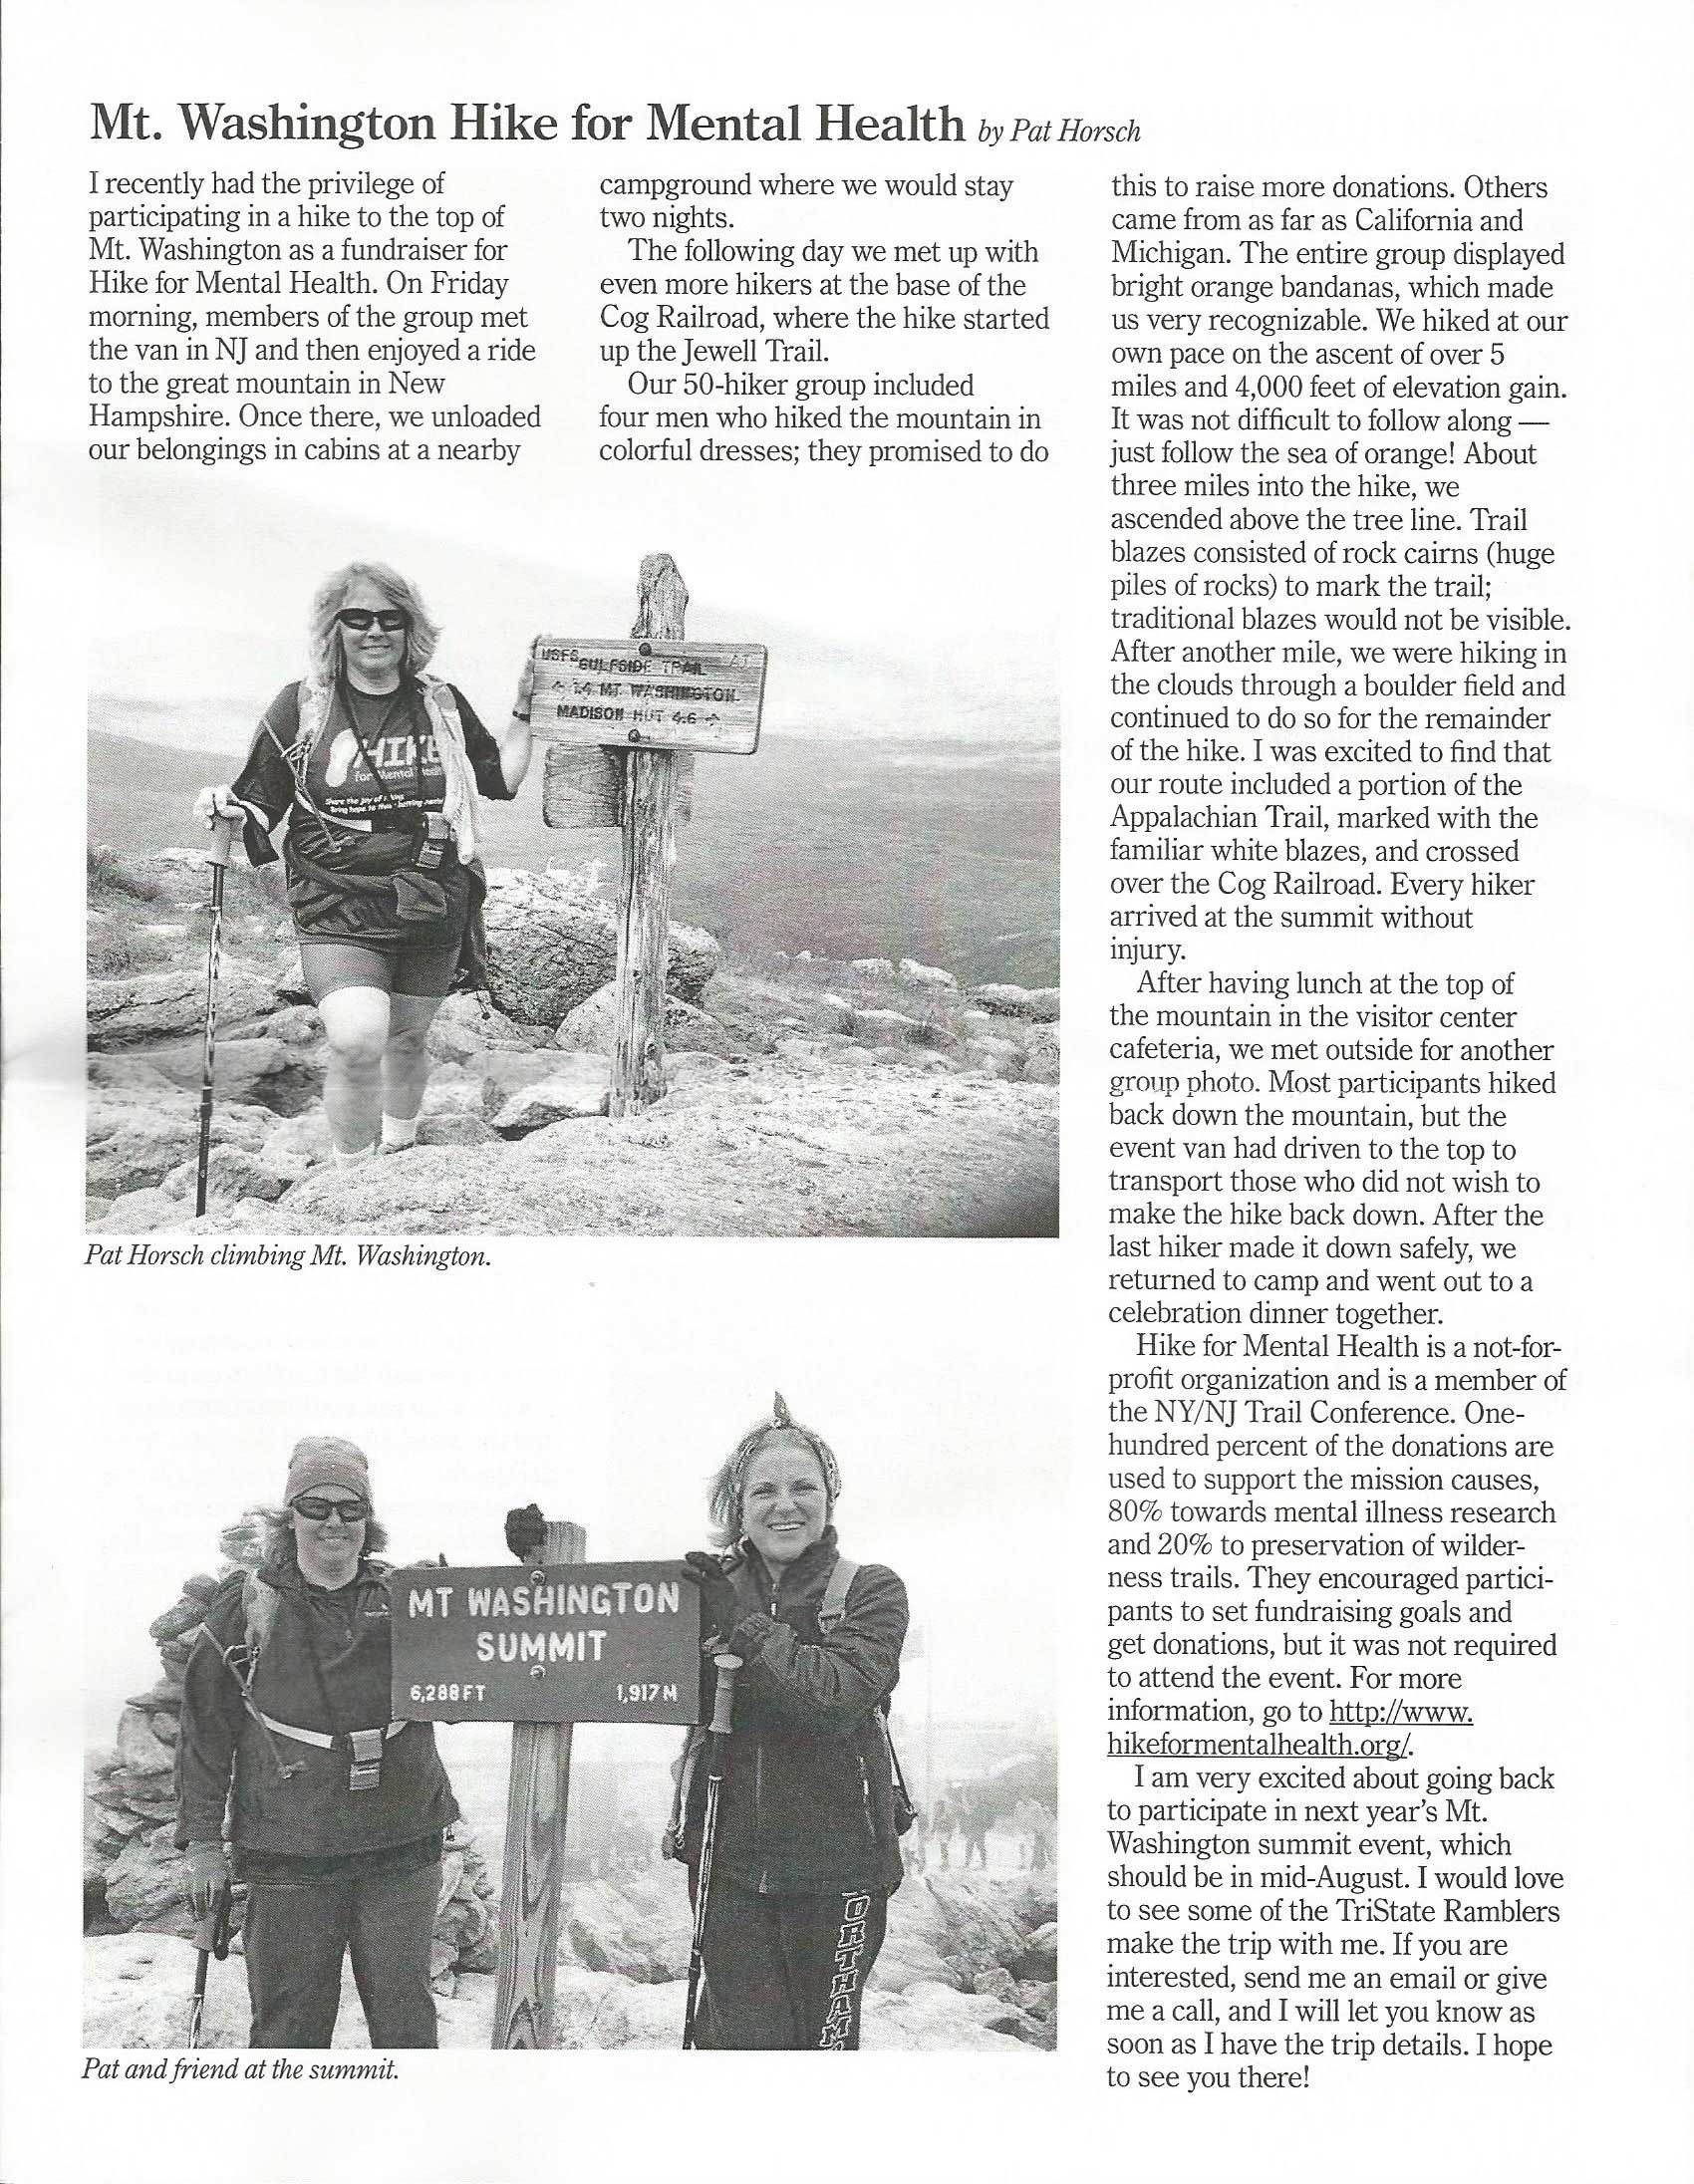 Pat Horsch joined our Third Annual Summit Mt. Washington hike in 2014. We hoping to see her and others from the Tri-State Ramblers back on the summit in 2015. Thanks, for the great write-up, Pat.